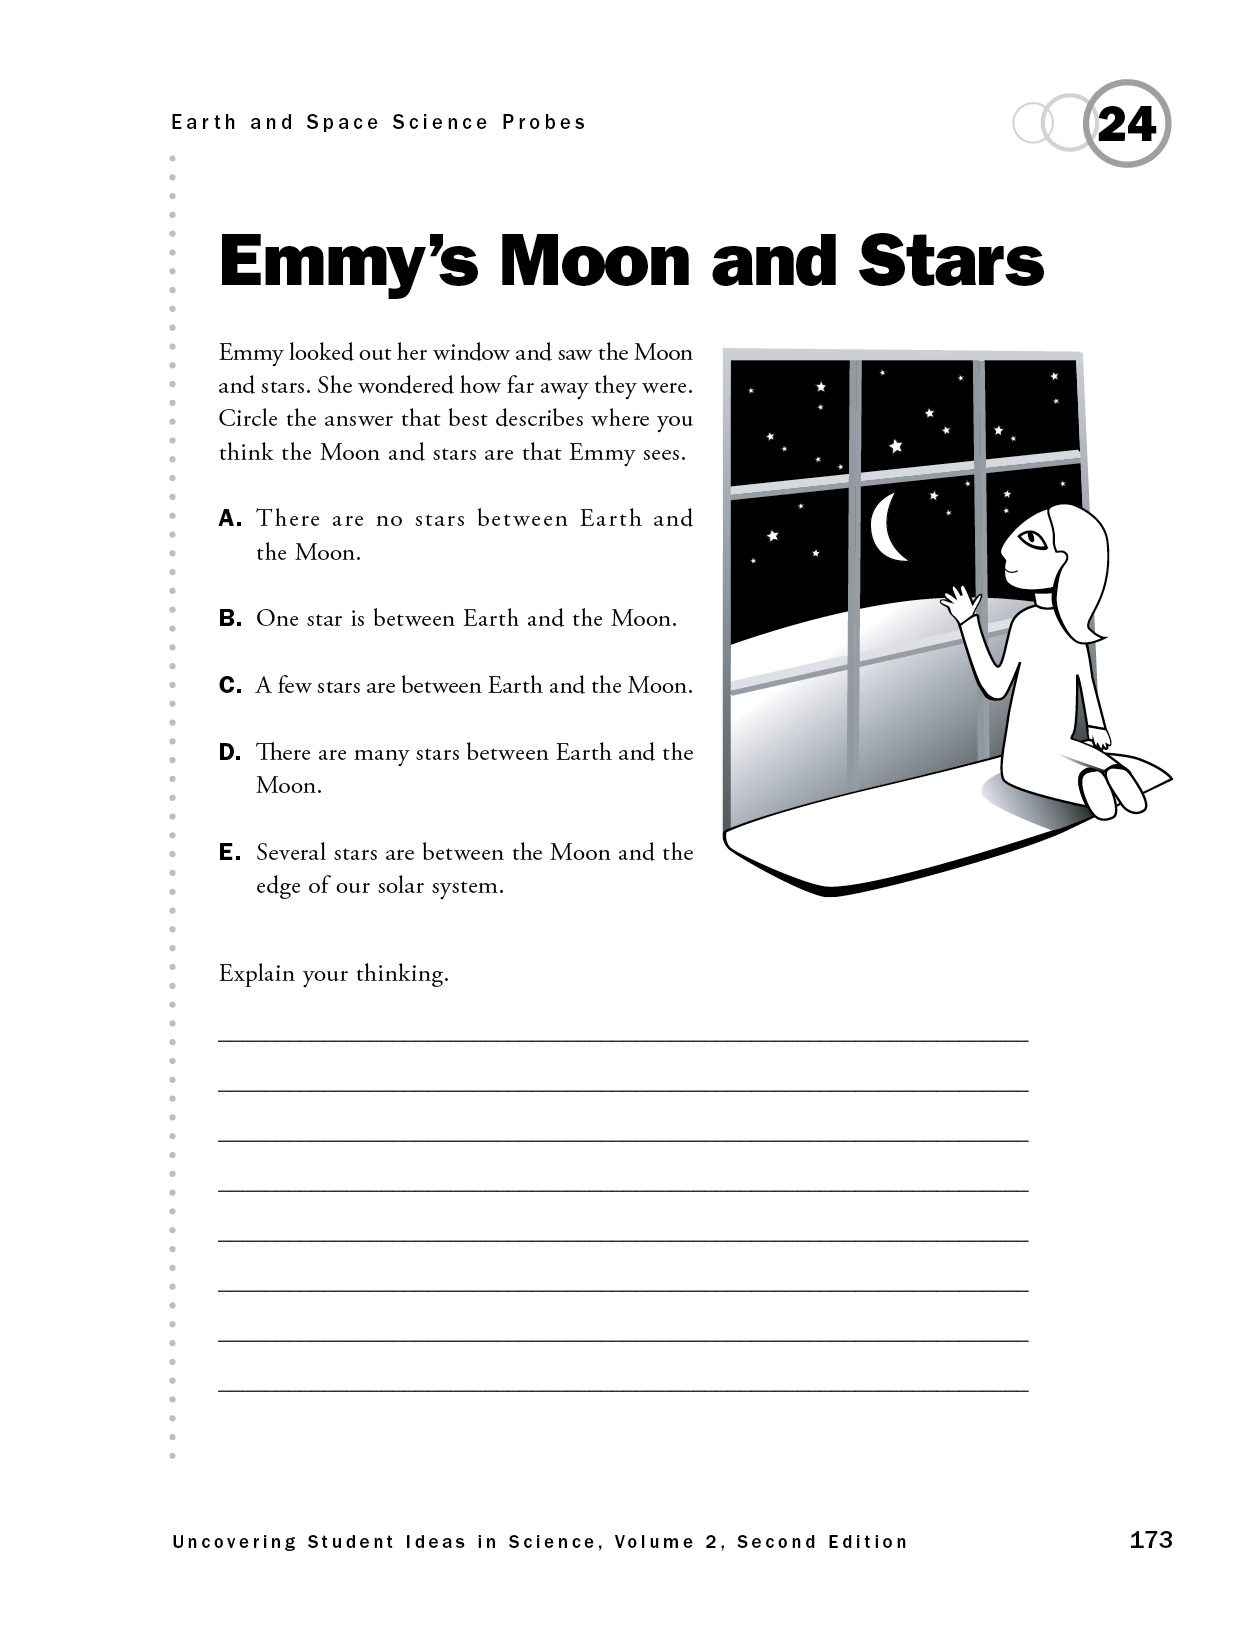 Emmy's Moon and Stars